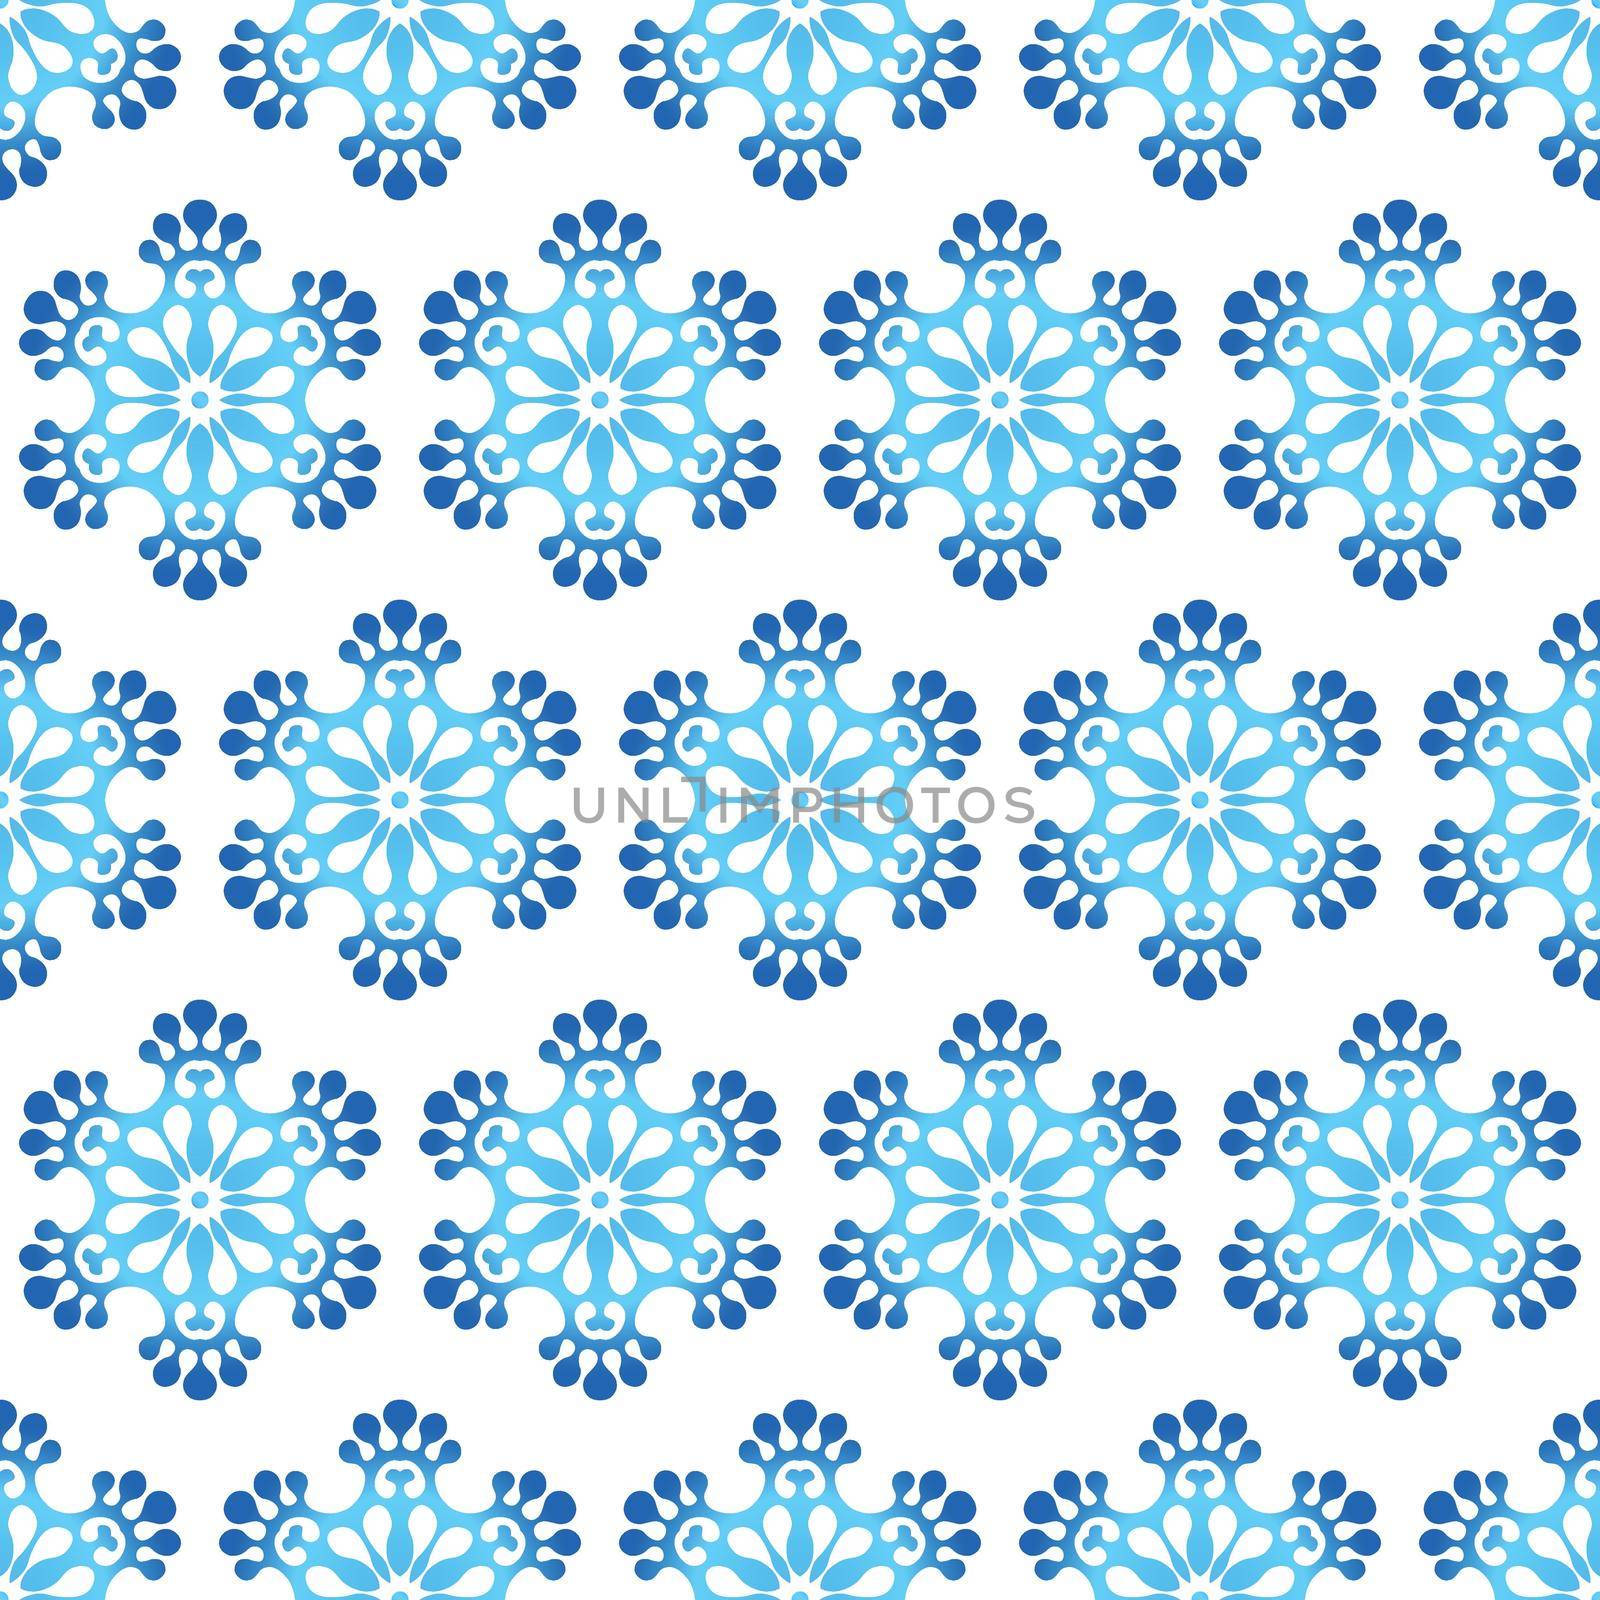 Winter seamless pattern with blue gradient snowflakes on white background. Vector illustration for fabric, textile wallpaper, posters, gift wrapping paper. Christmas vector illustration.